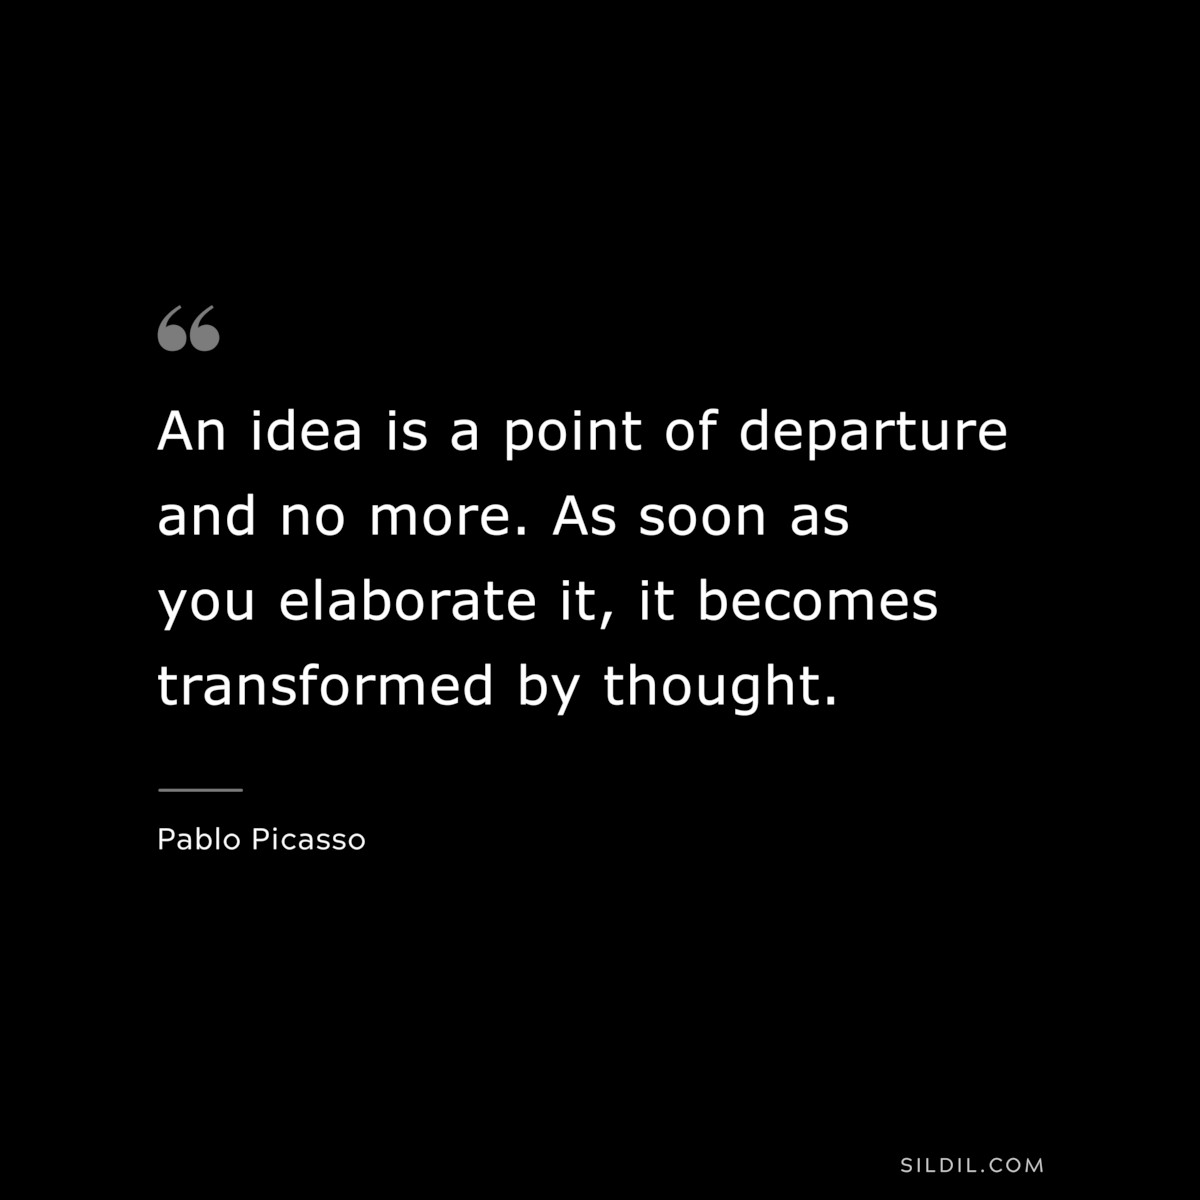 An idea is a point of departure and no more. As soon as you elaborate it, it becomes transformed by thought. ― Pablo Picasso